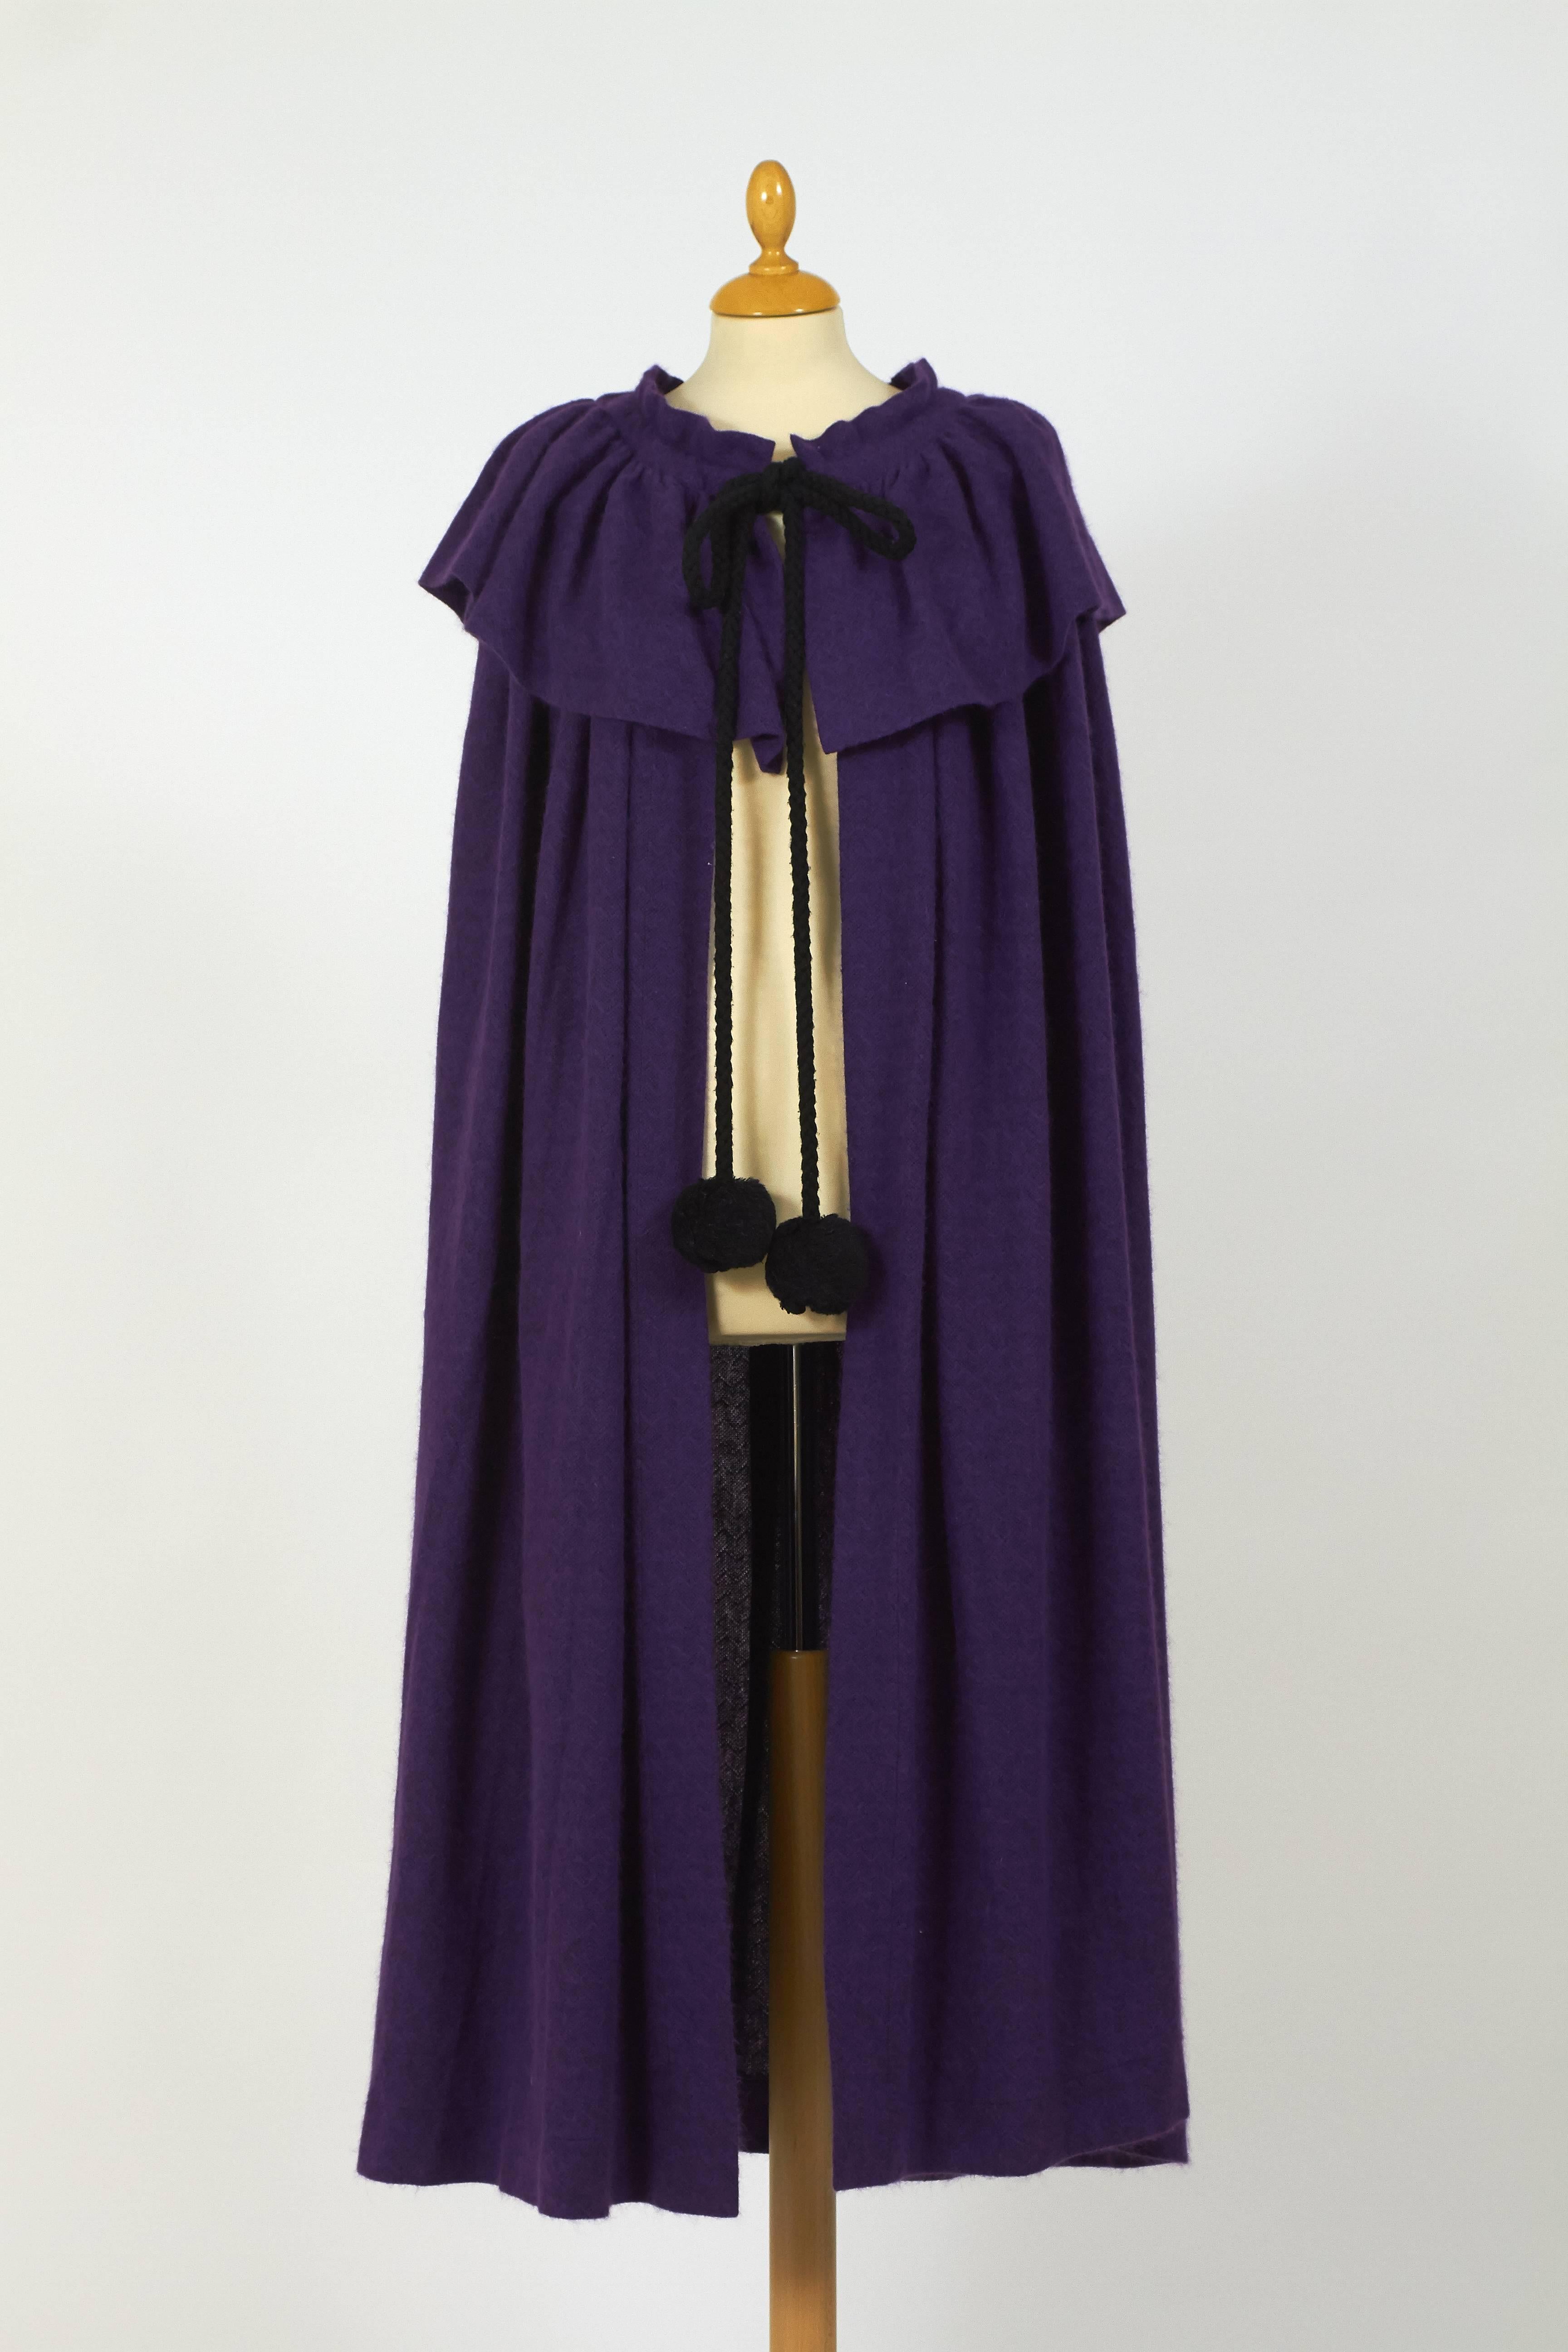 This gorgeous 1970s Yves Saint Laurent Rive Gauche cape cloack is in a purple angora wool fabric and has flounce collar and black pom pom tie cord closure. 

Measurement:
Estimeted size: one size
Max lenght 50 inch